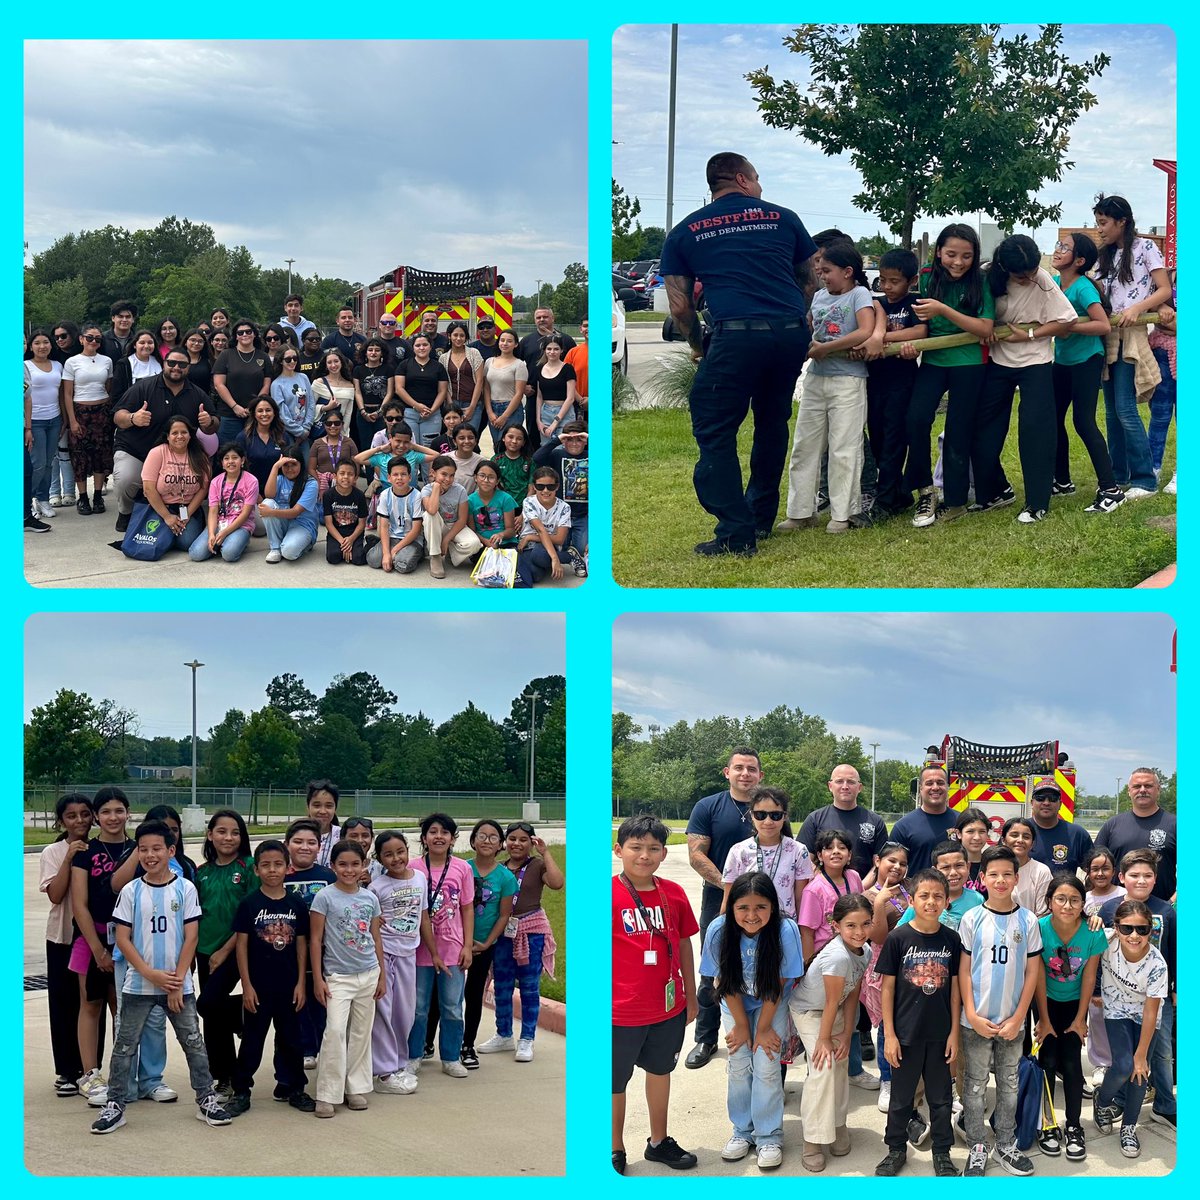 Thank you @AvalosPTECH Big Brothers & Sisters for showing our “Littles” around campus. They loved their gifts & eating pizza with their “Bigs”! What a special treat of learning about fighting fires from firefighters. @Arcos1968 @BenjaminVoss_ @maty_orozco @drgoffney @Miss_MMunoz